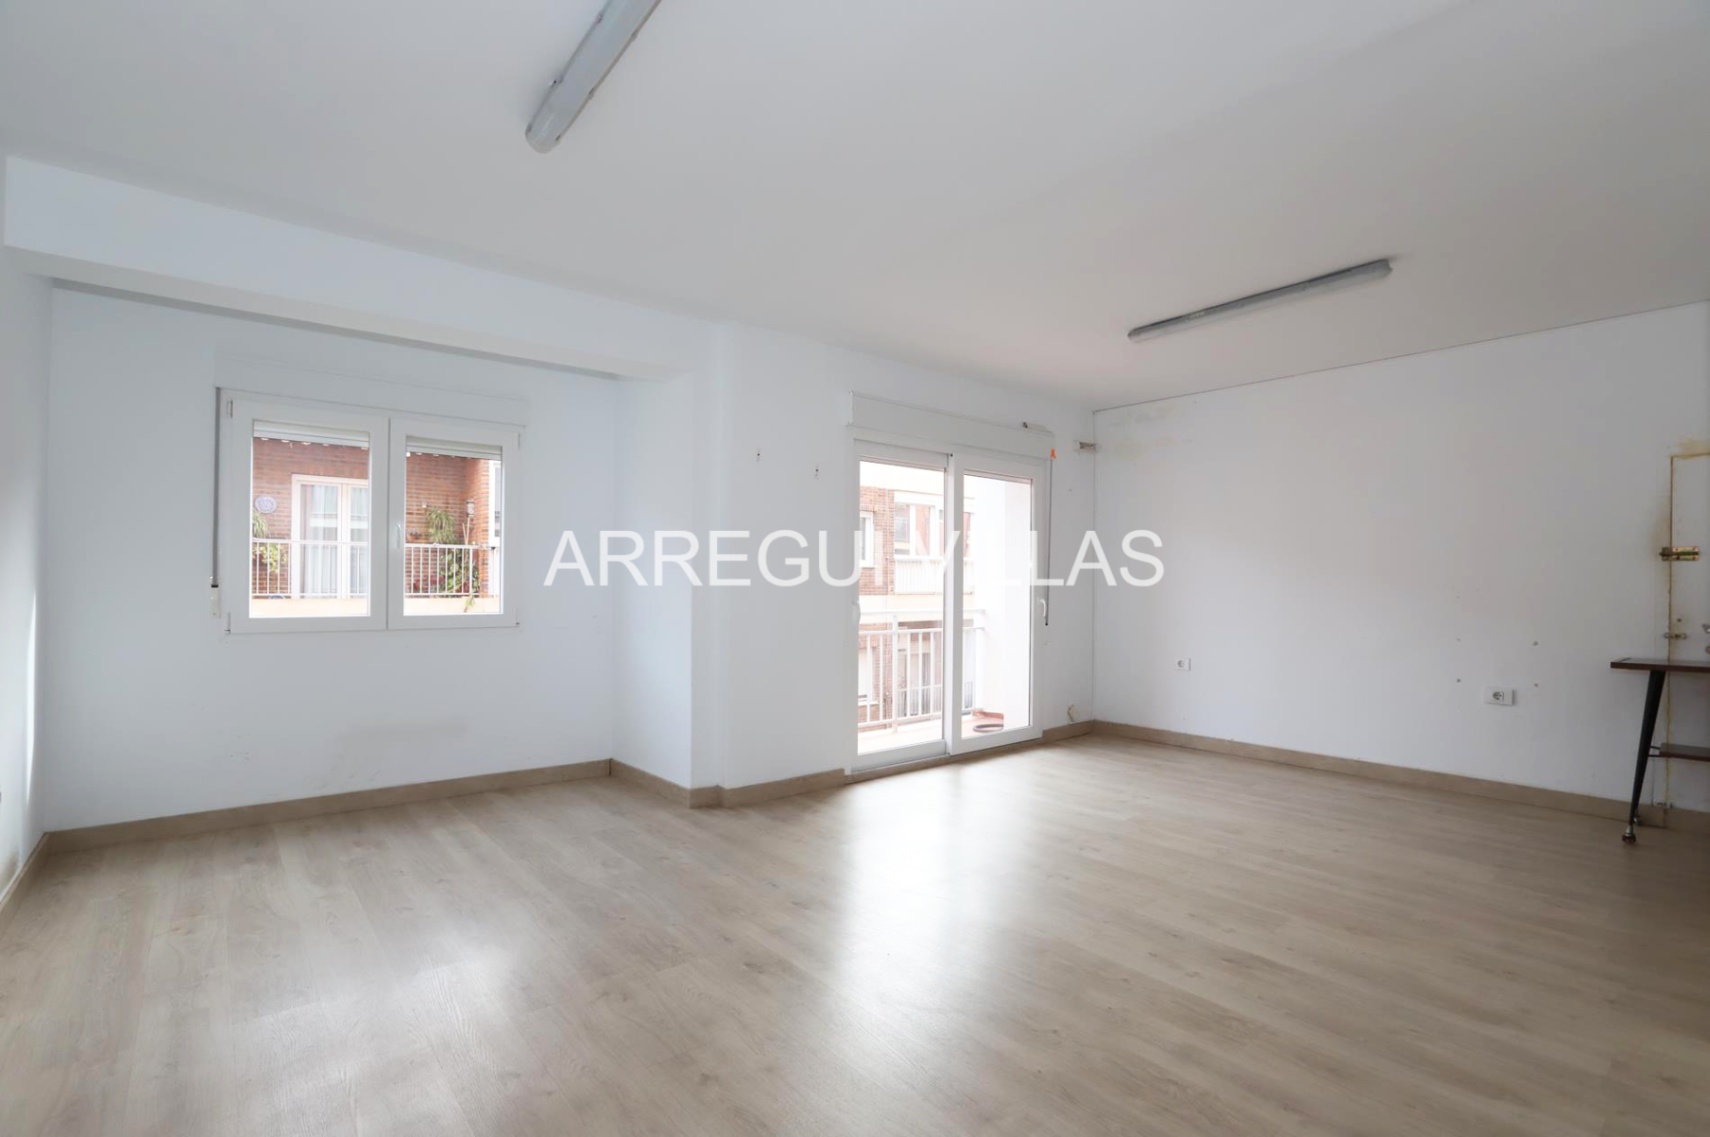 Apartment for sale in Dénia center